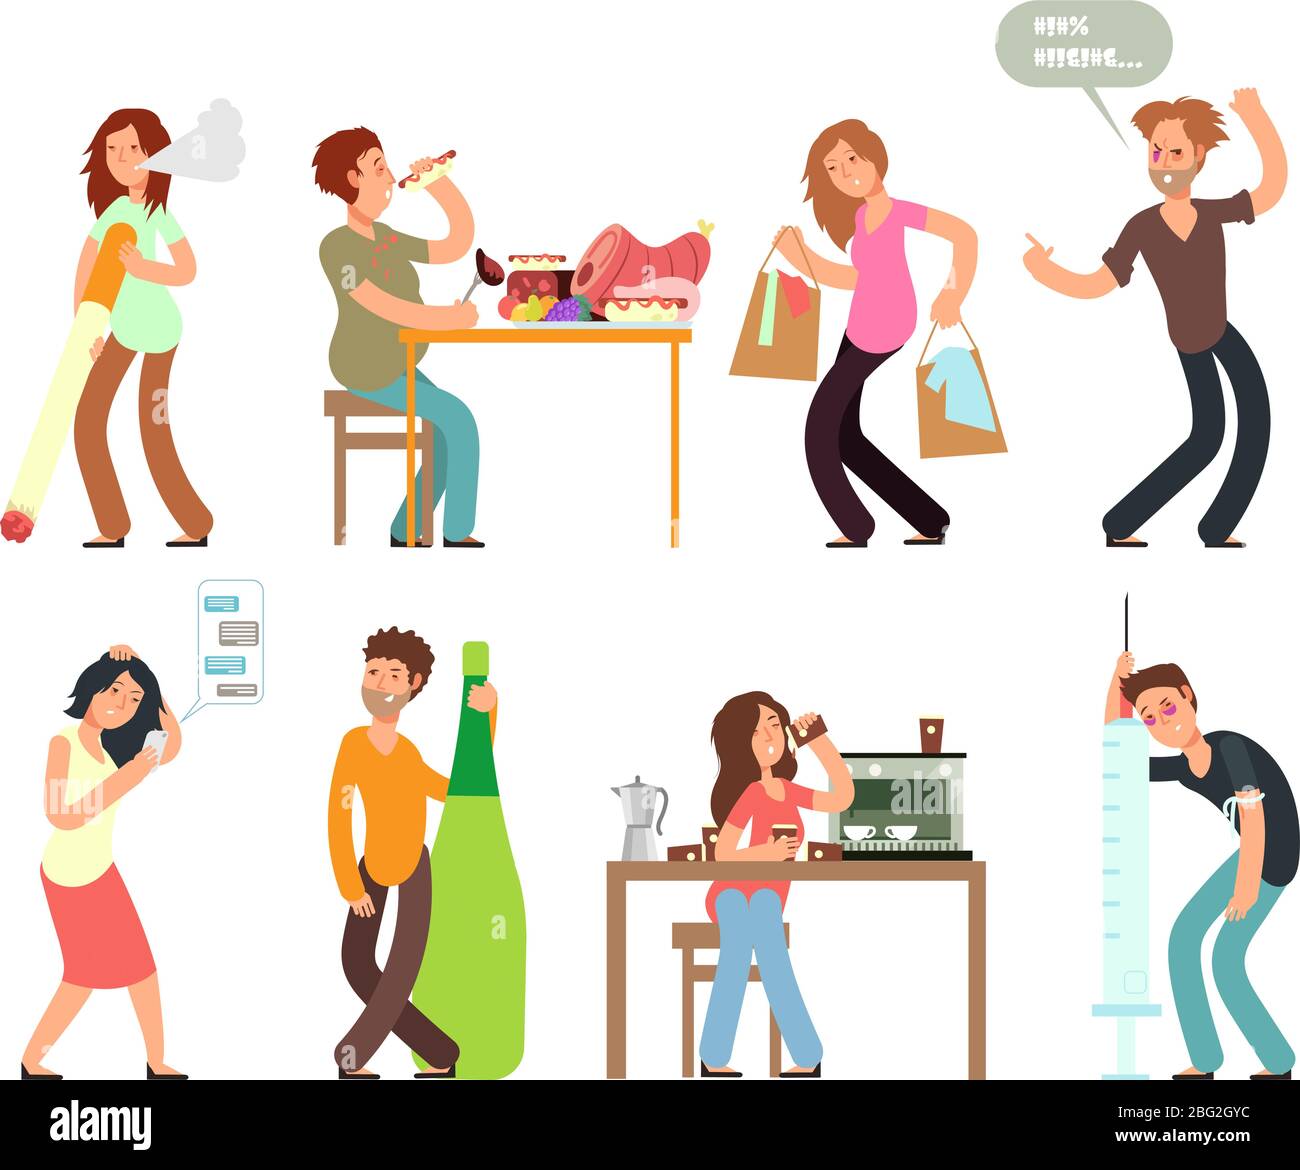 Unhealthy lifestyle Stock Vector Images - Alamy